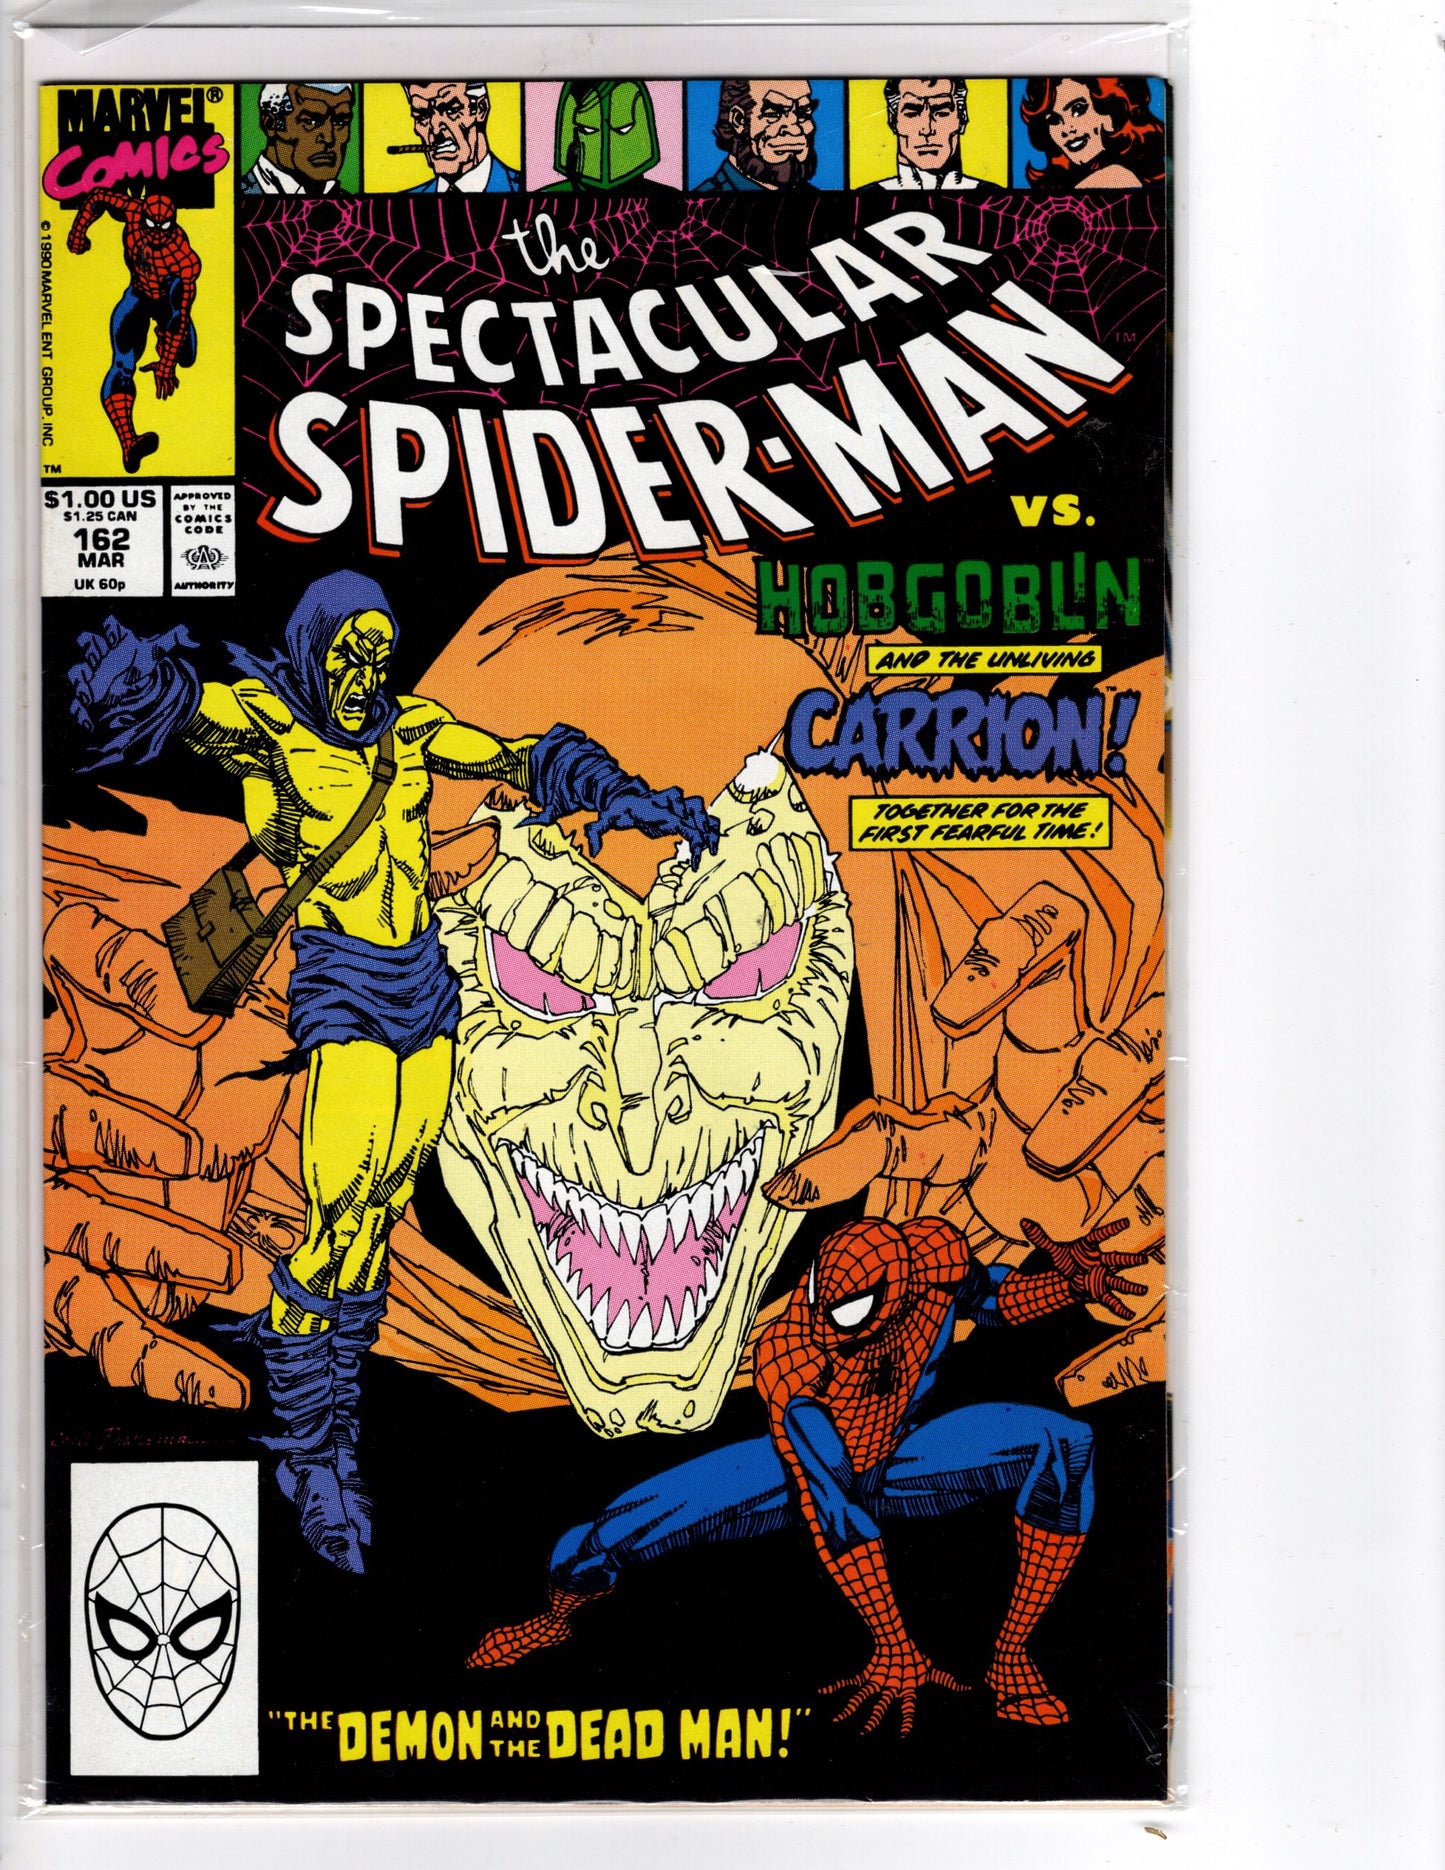 The Spectacular Spider-Man #162